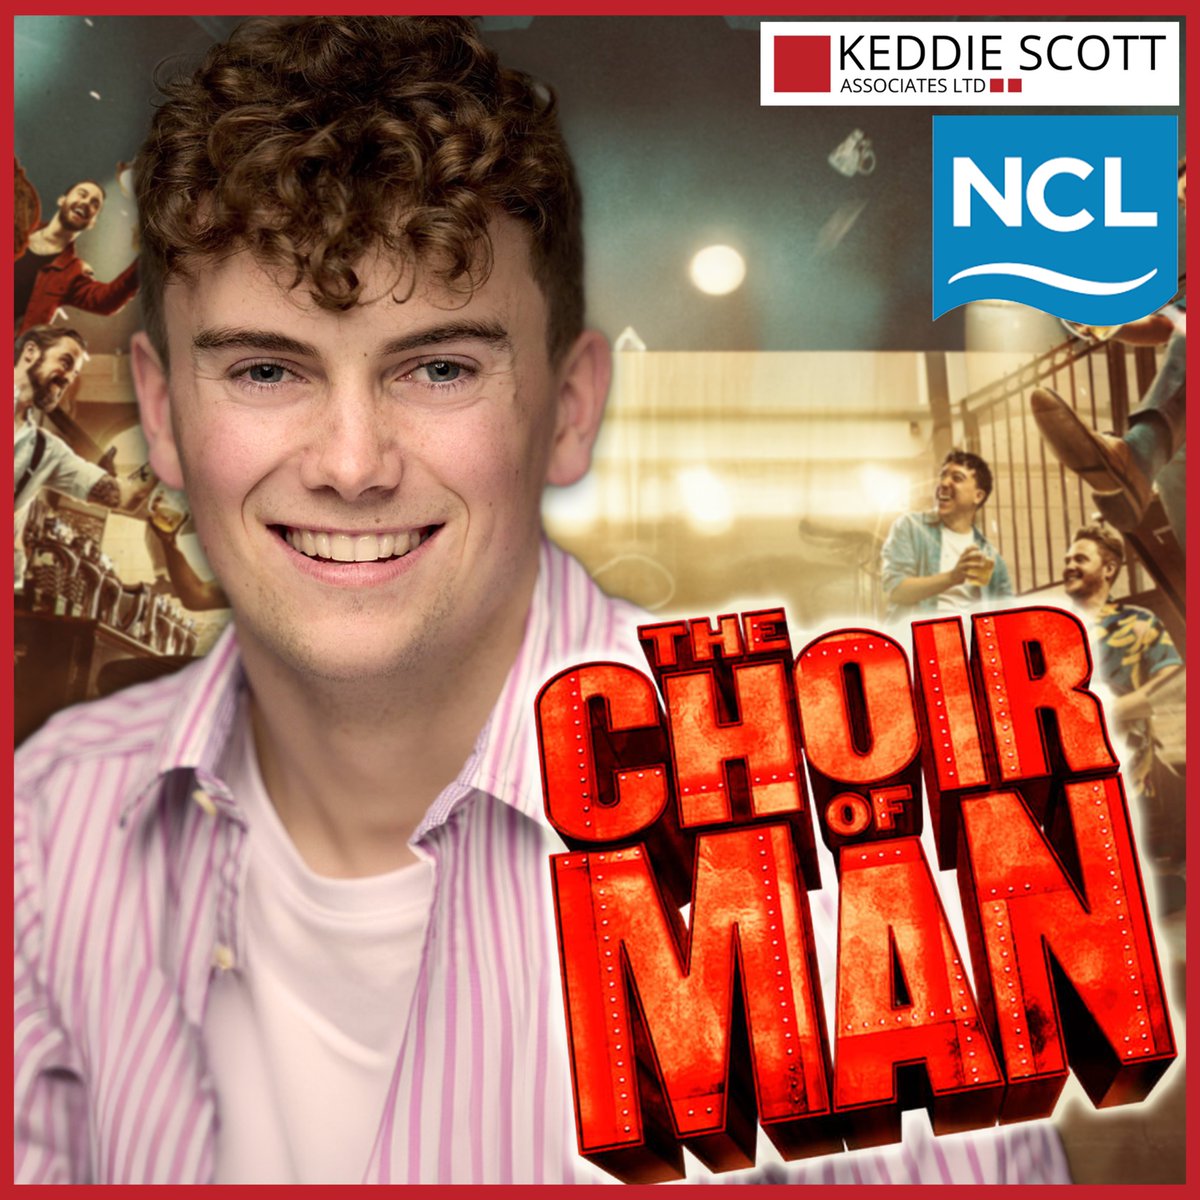 Exciting times ahead for our globe-trotting FREDDY MOORE who heads to the USA today to begin rehearsals for CHOIR OF MAN for Norwegian Cruise Lines (@CruiseNorwegian) #SuperClients